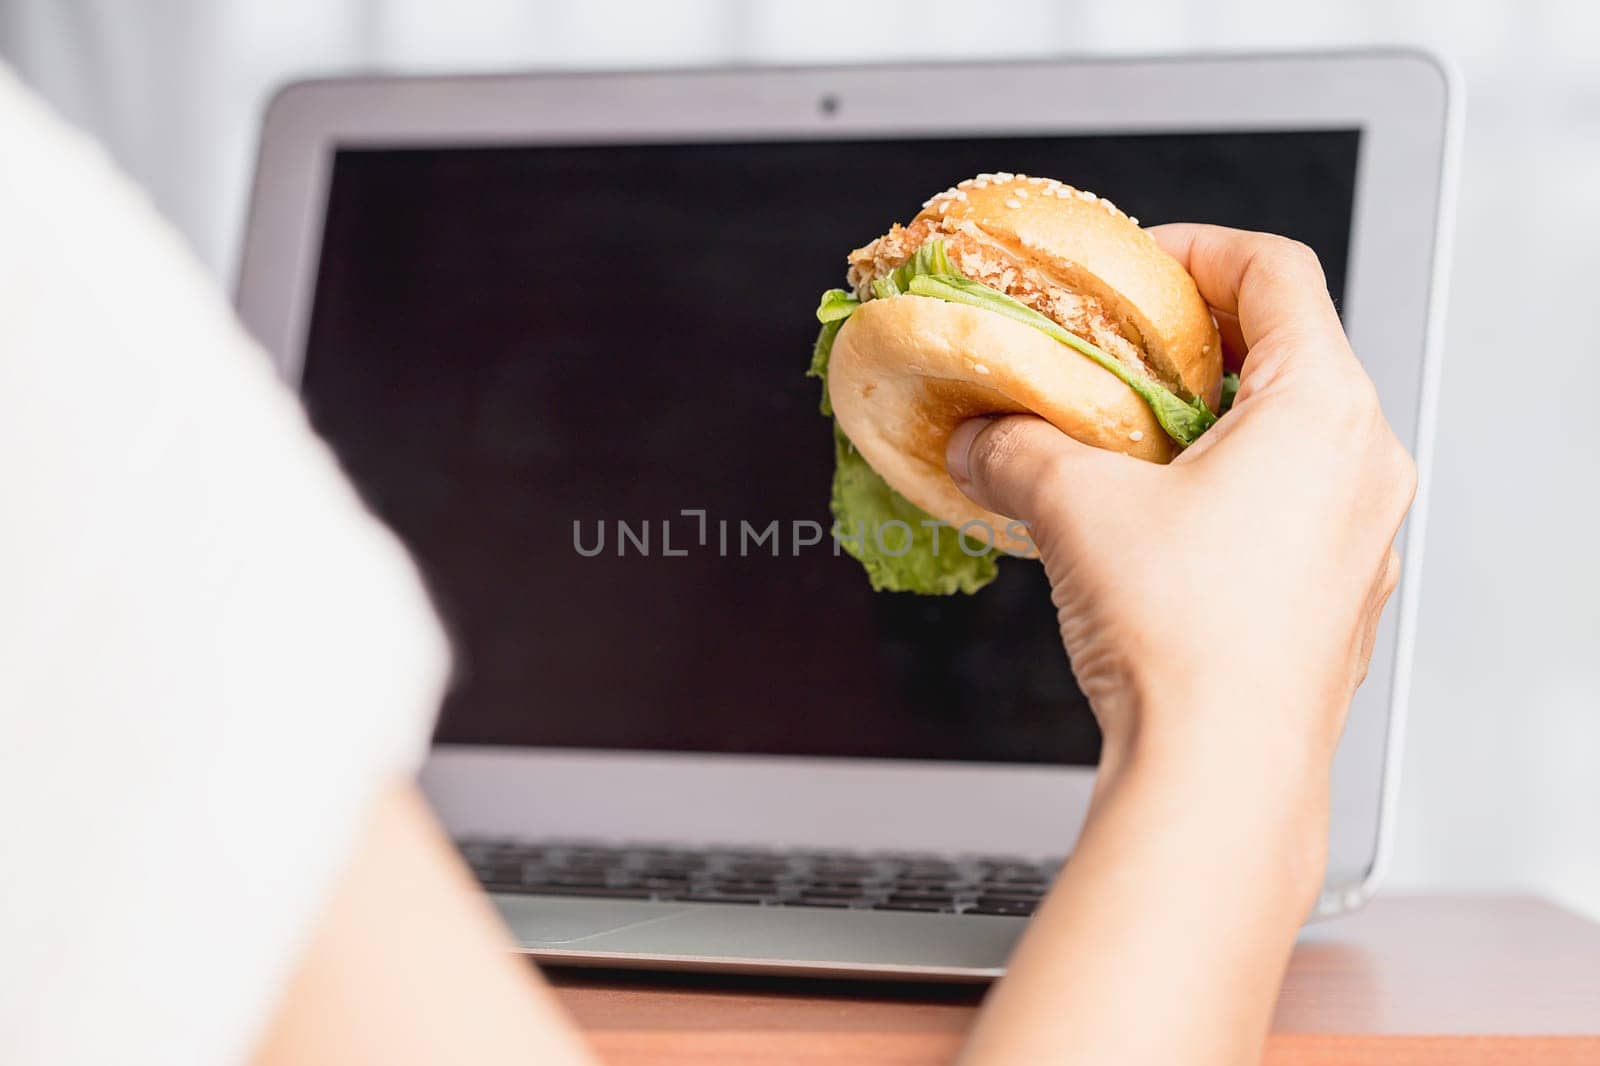 Hand holding a delicious hamburger and using laptop computer for eating while working concept.